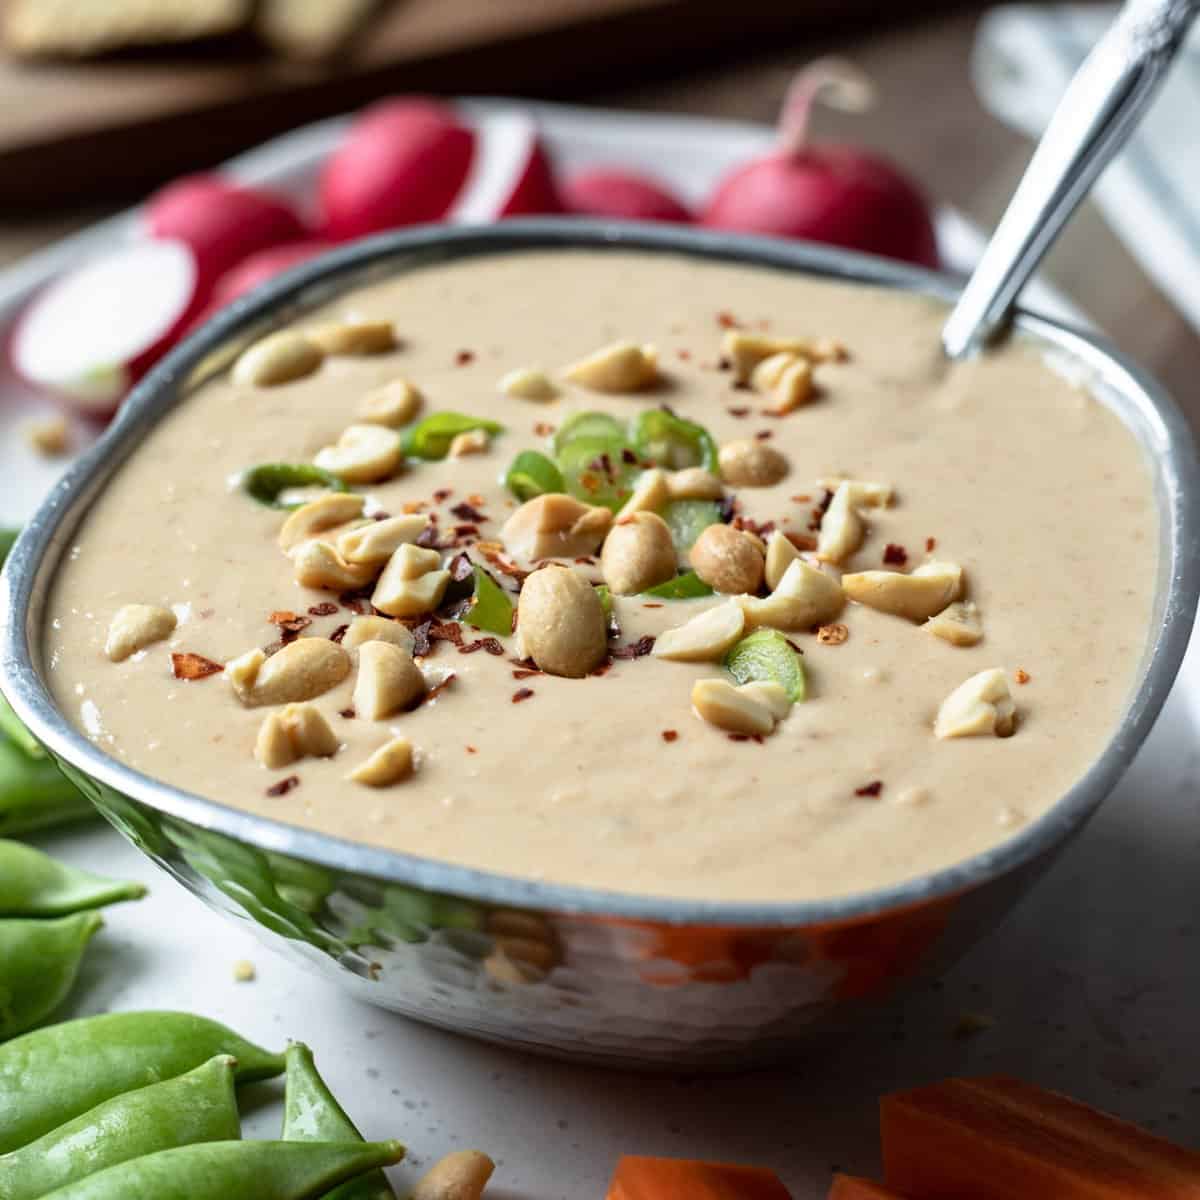 creamy white bean dressing garnished with green onion and peanuts.